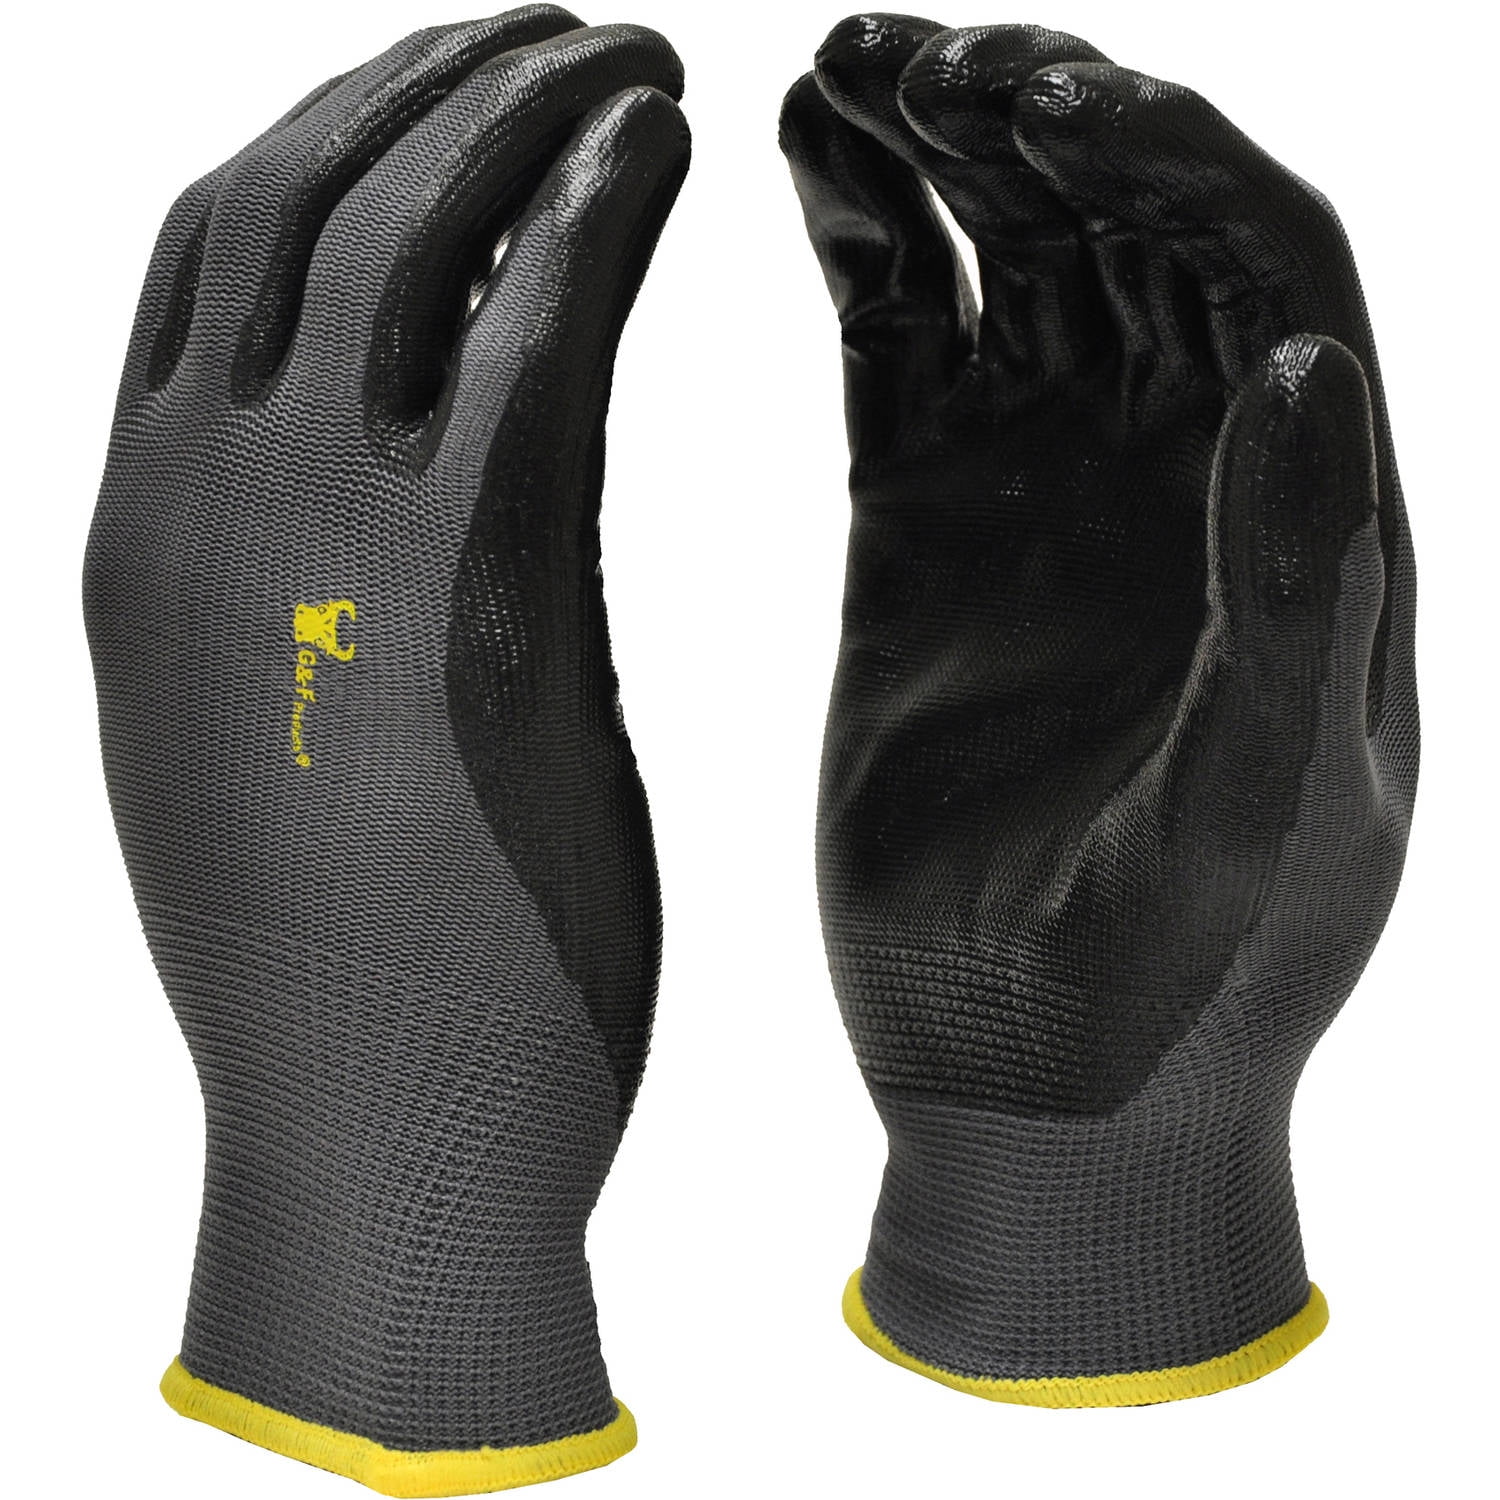 12 pairs of Be-Safe Black Breathable Health and Safety Work Gloves. 